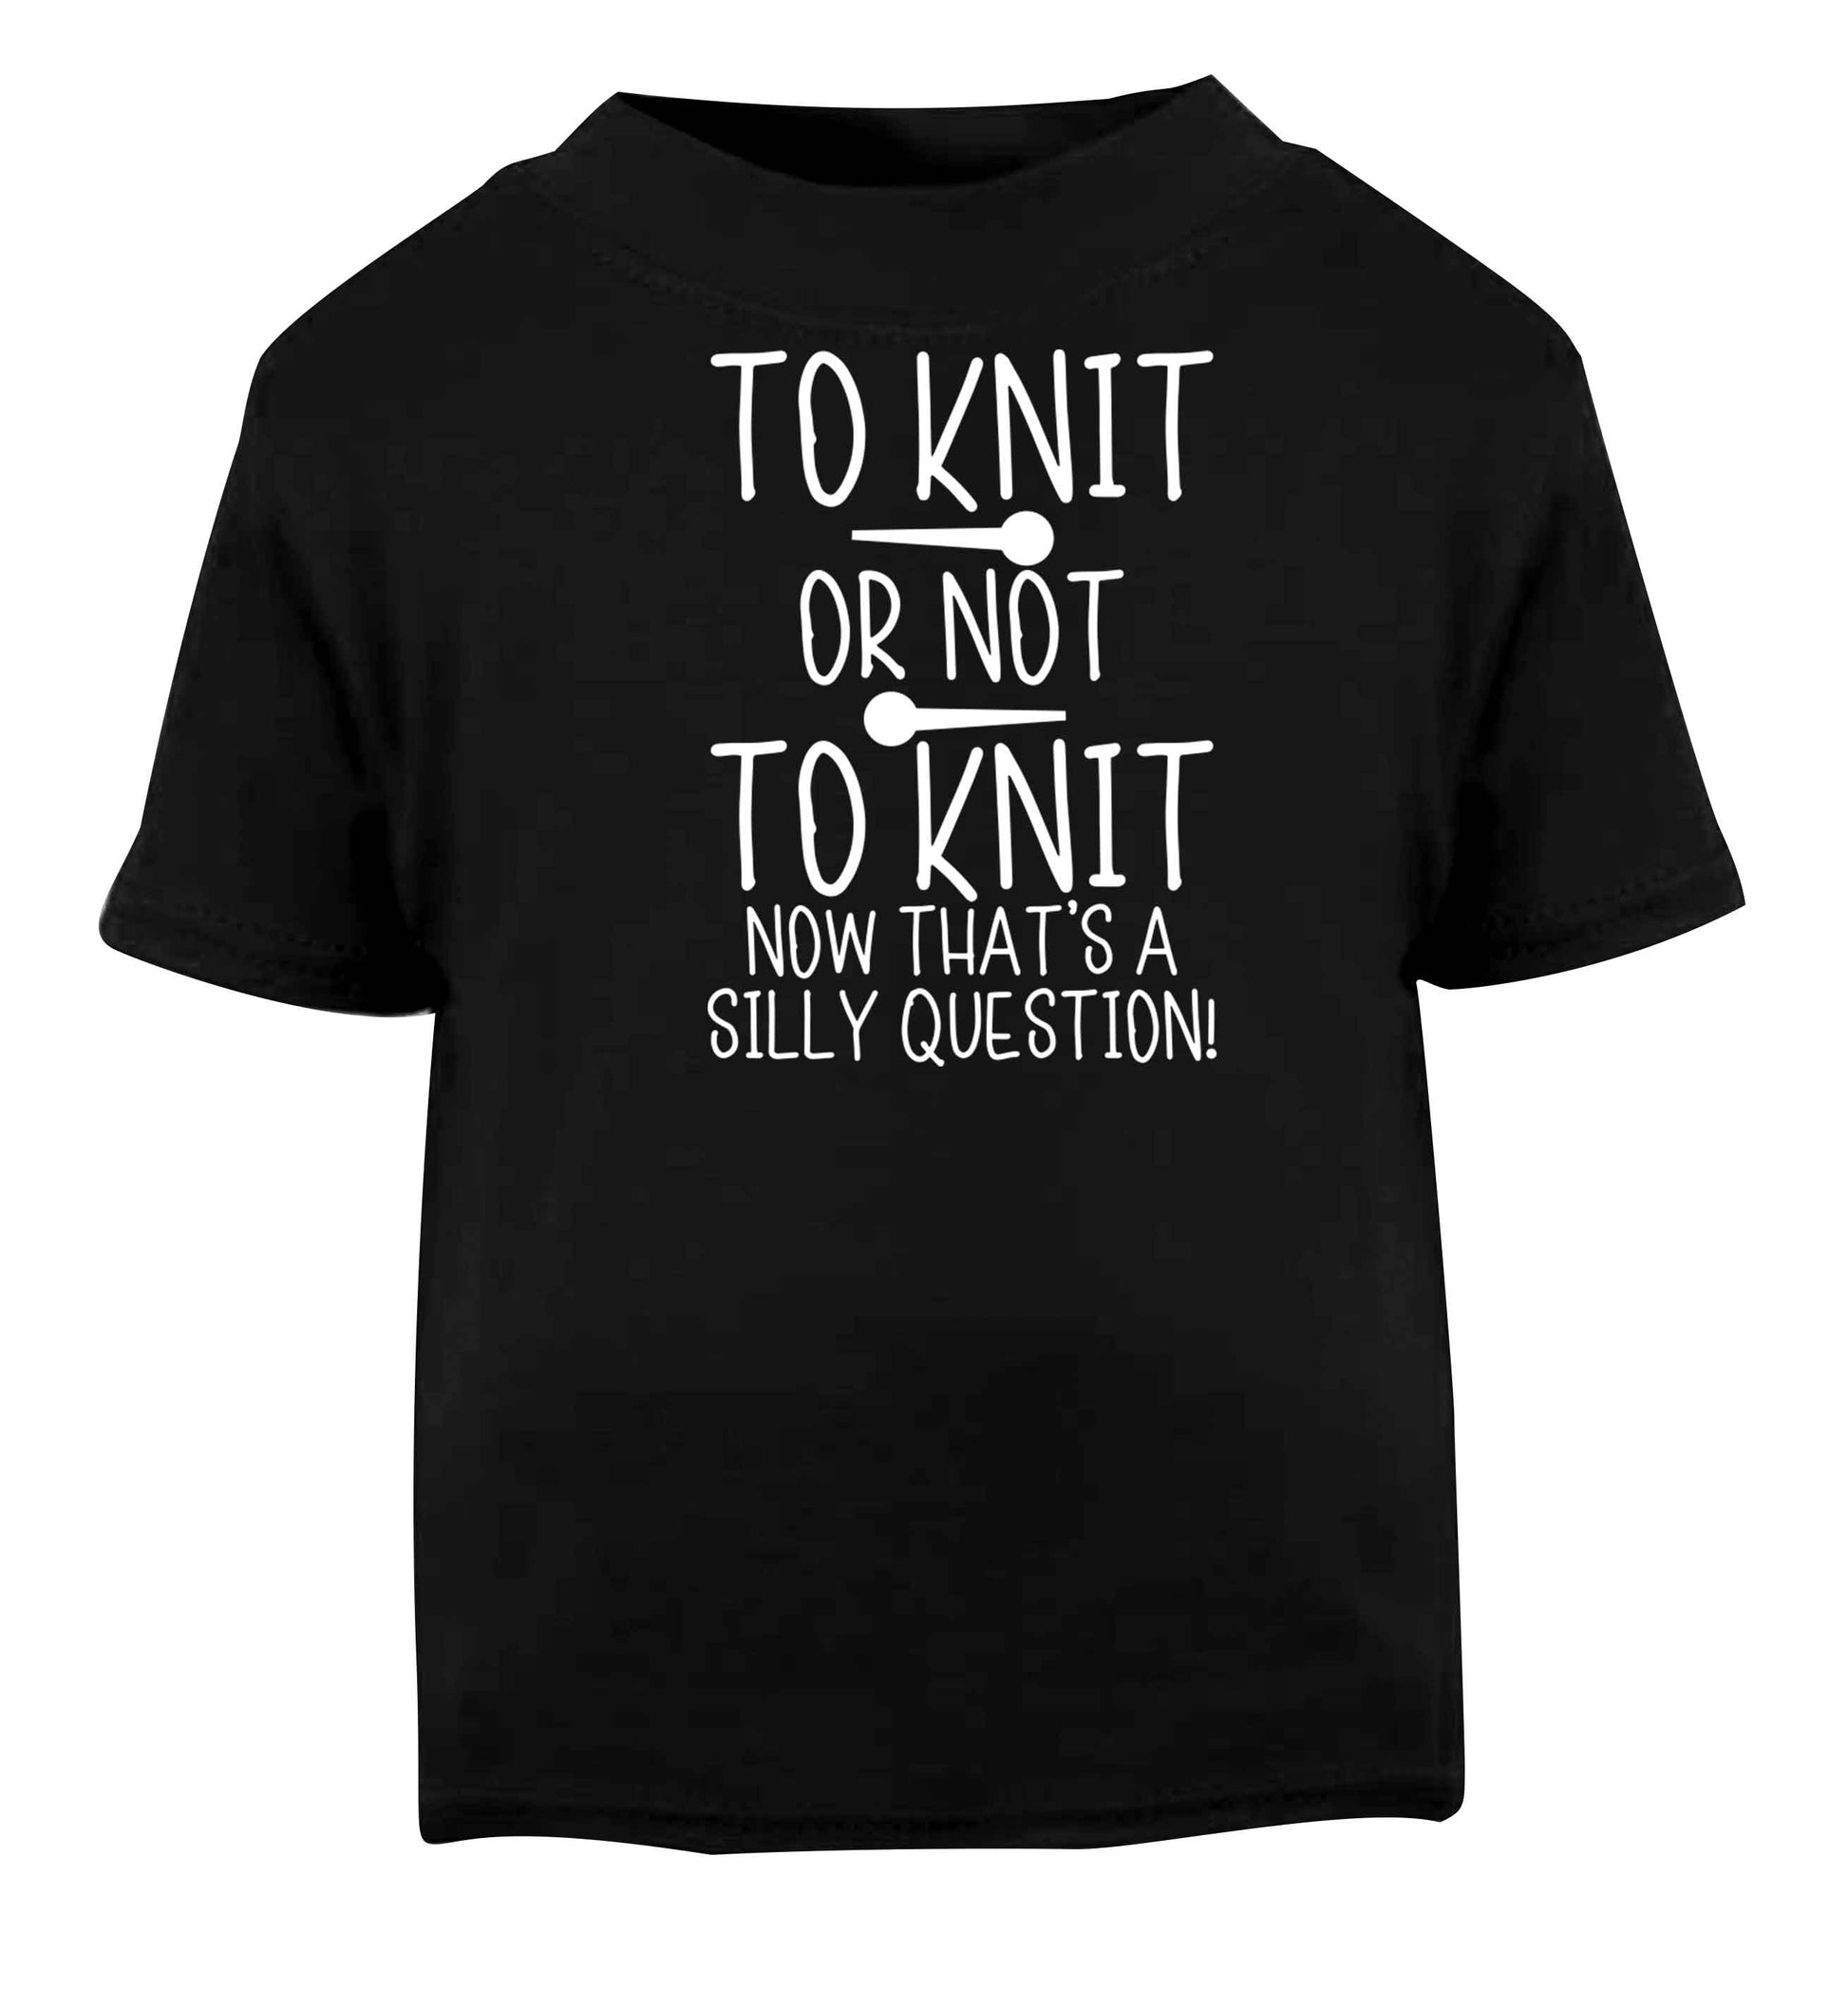 To knit or not to knit now that's a silly question Black baby toddler Tshirt 2 years